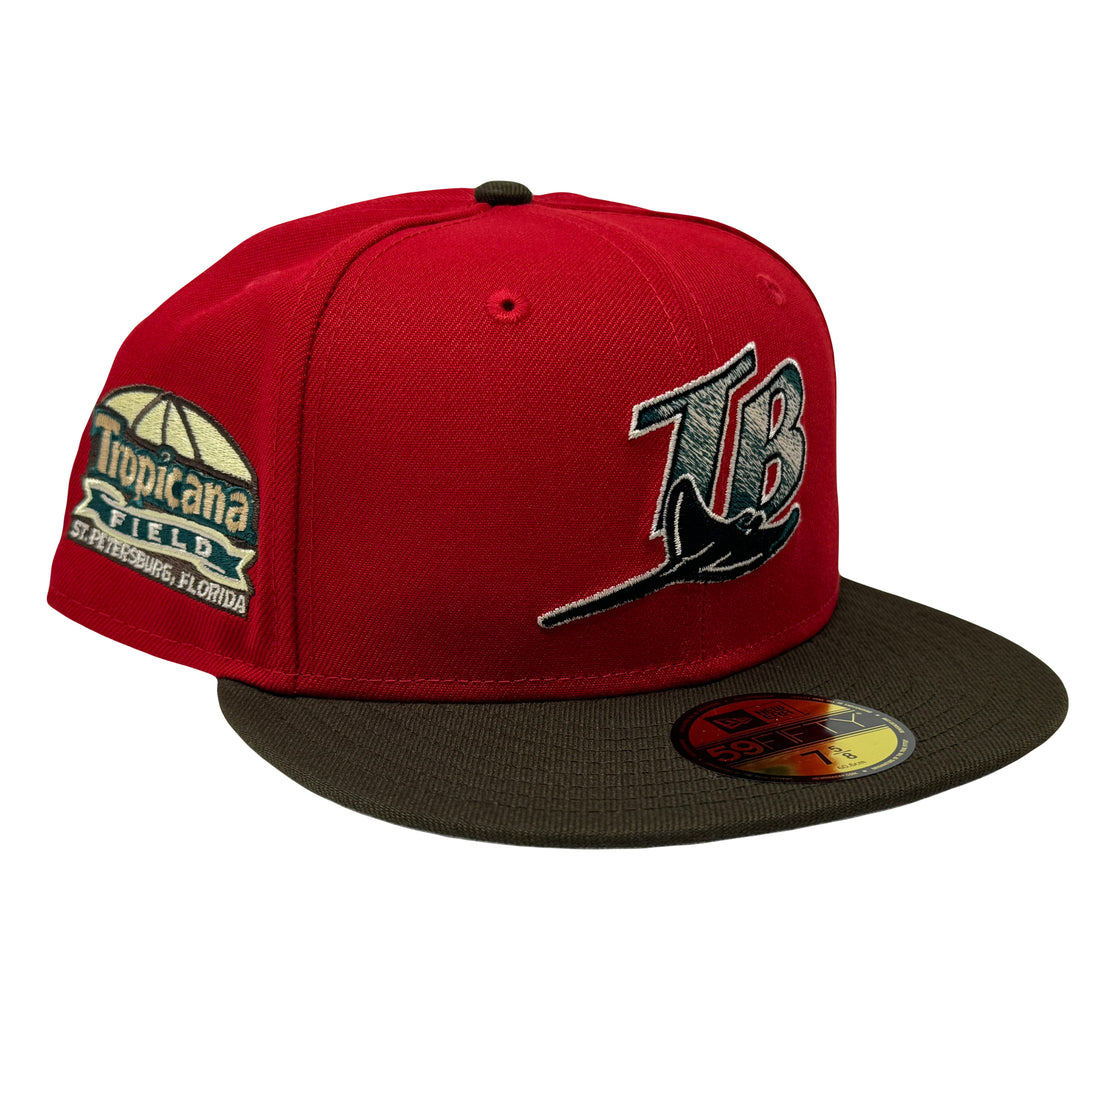 Tampa Bay Devil Rays Tropicana Field Red Brown New Era Fitted Hat